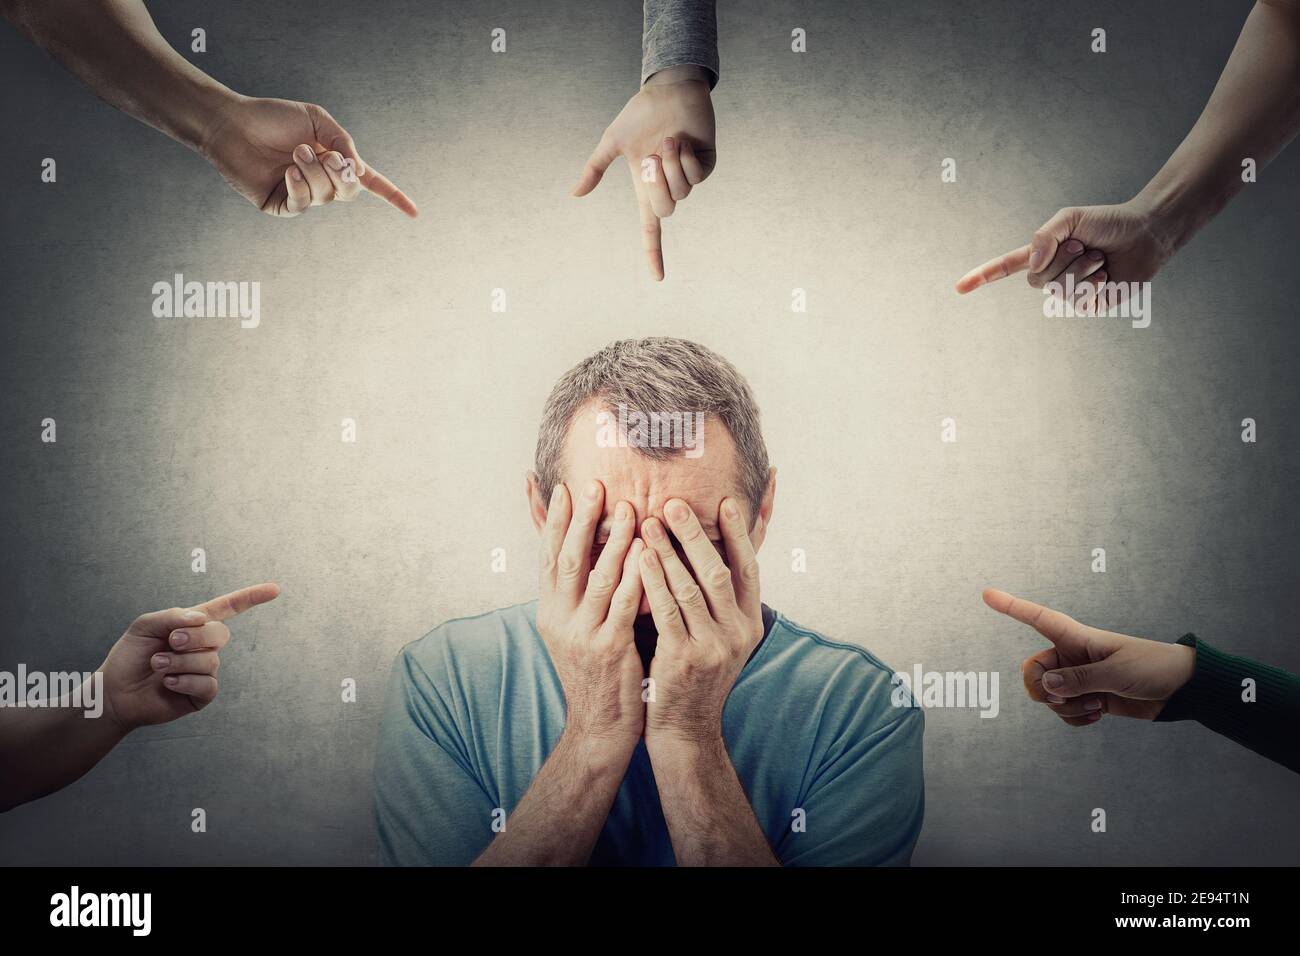 Ashamed middle aged man, covers his face with hands, as multiple people points fingers to him, blaming and scolding. Male senior suffering emotional b Stock Photo